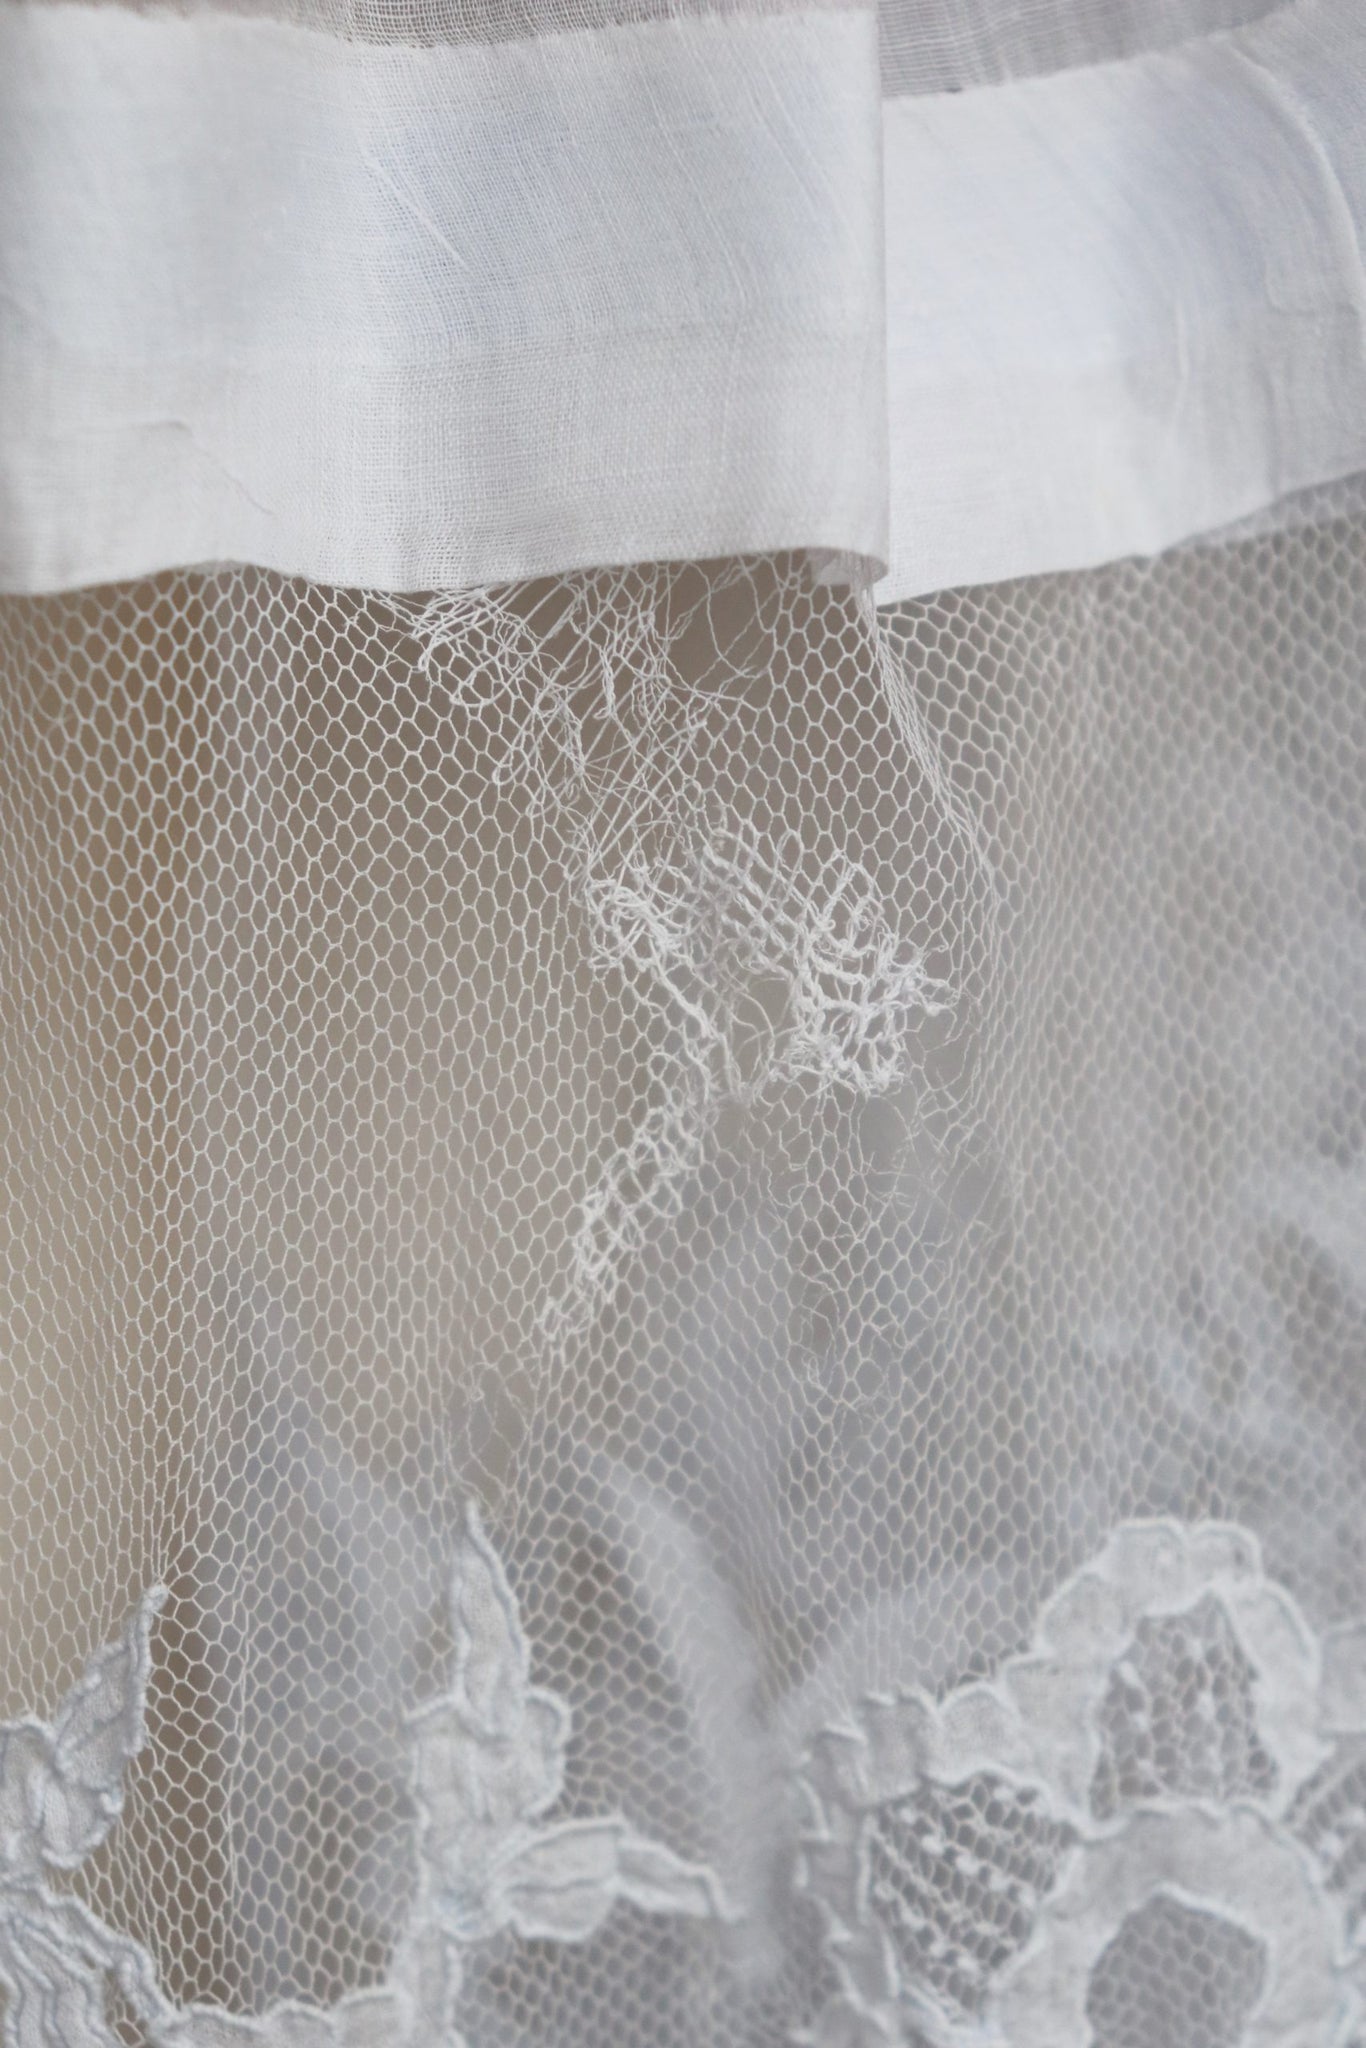 1900s Church Linen Smock Net Lace Embroidery